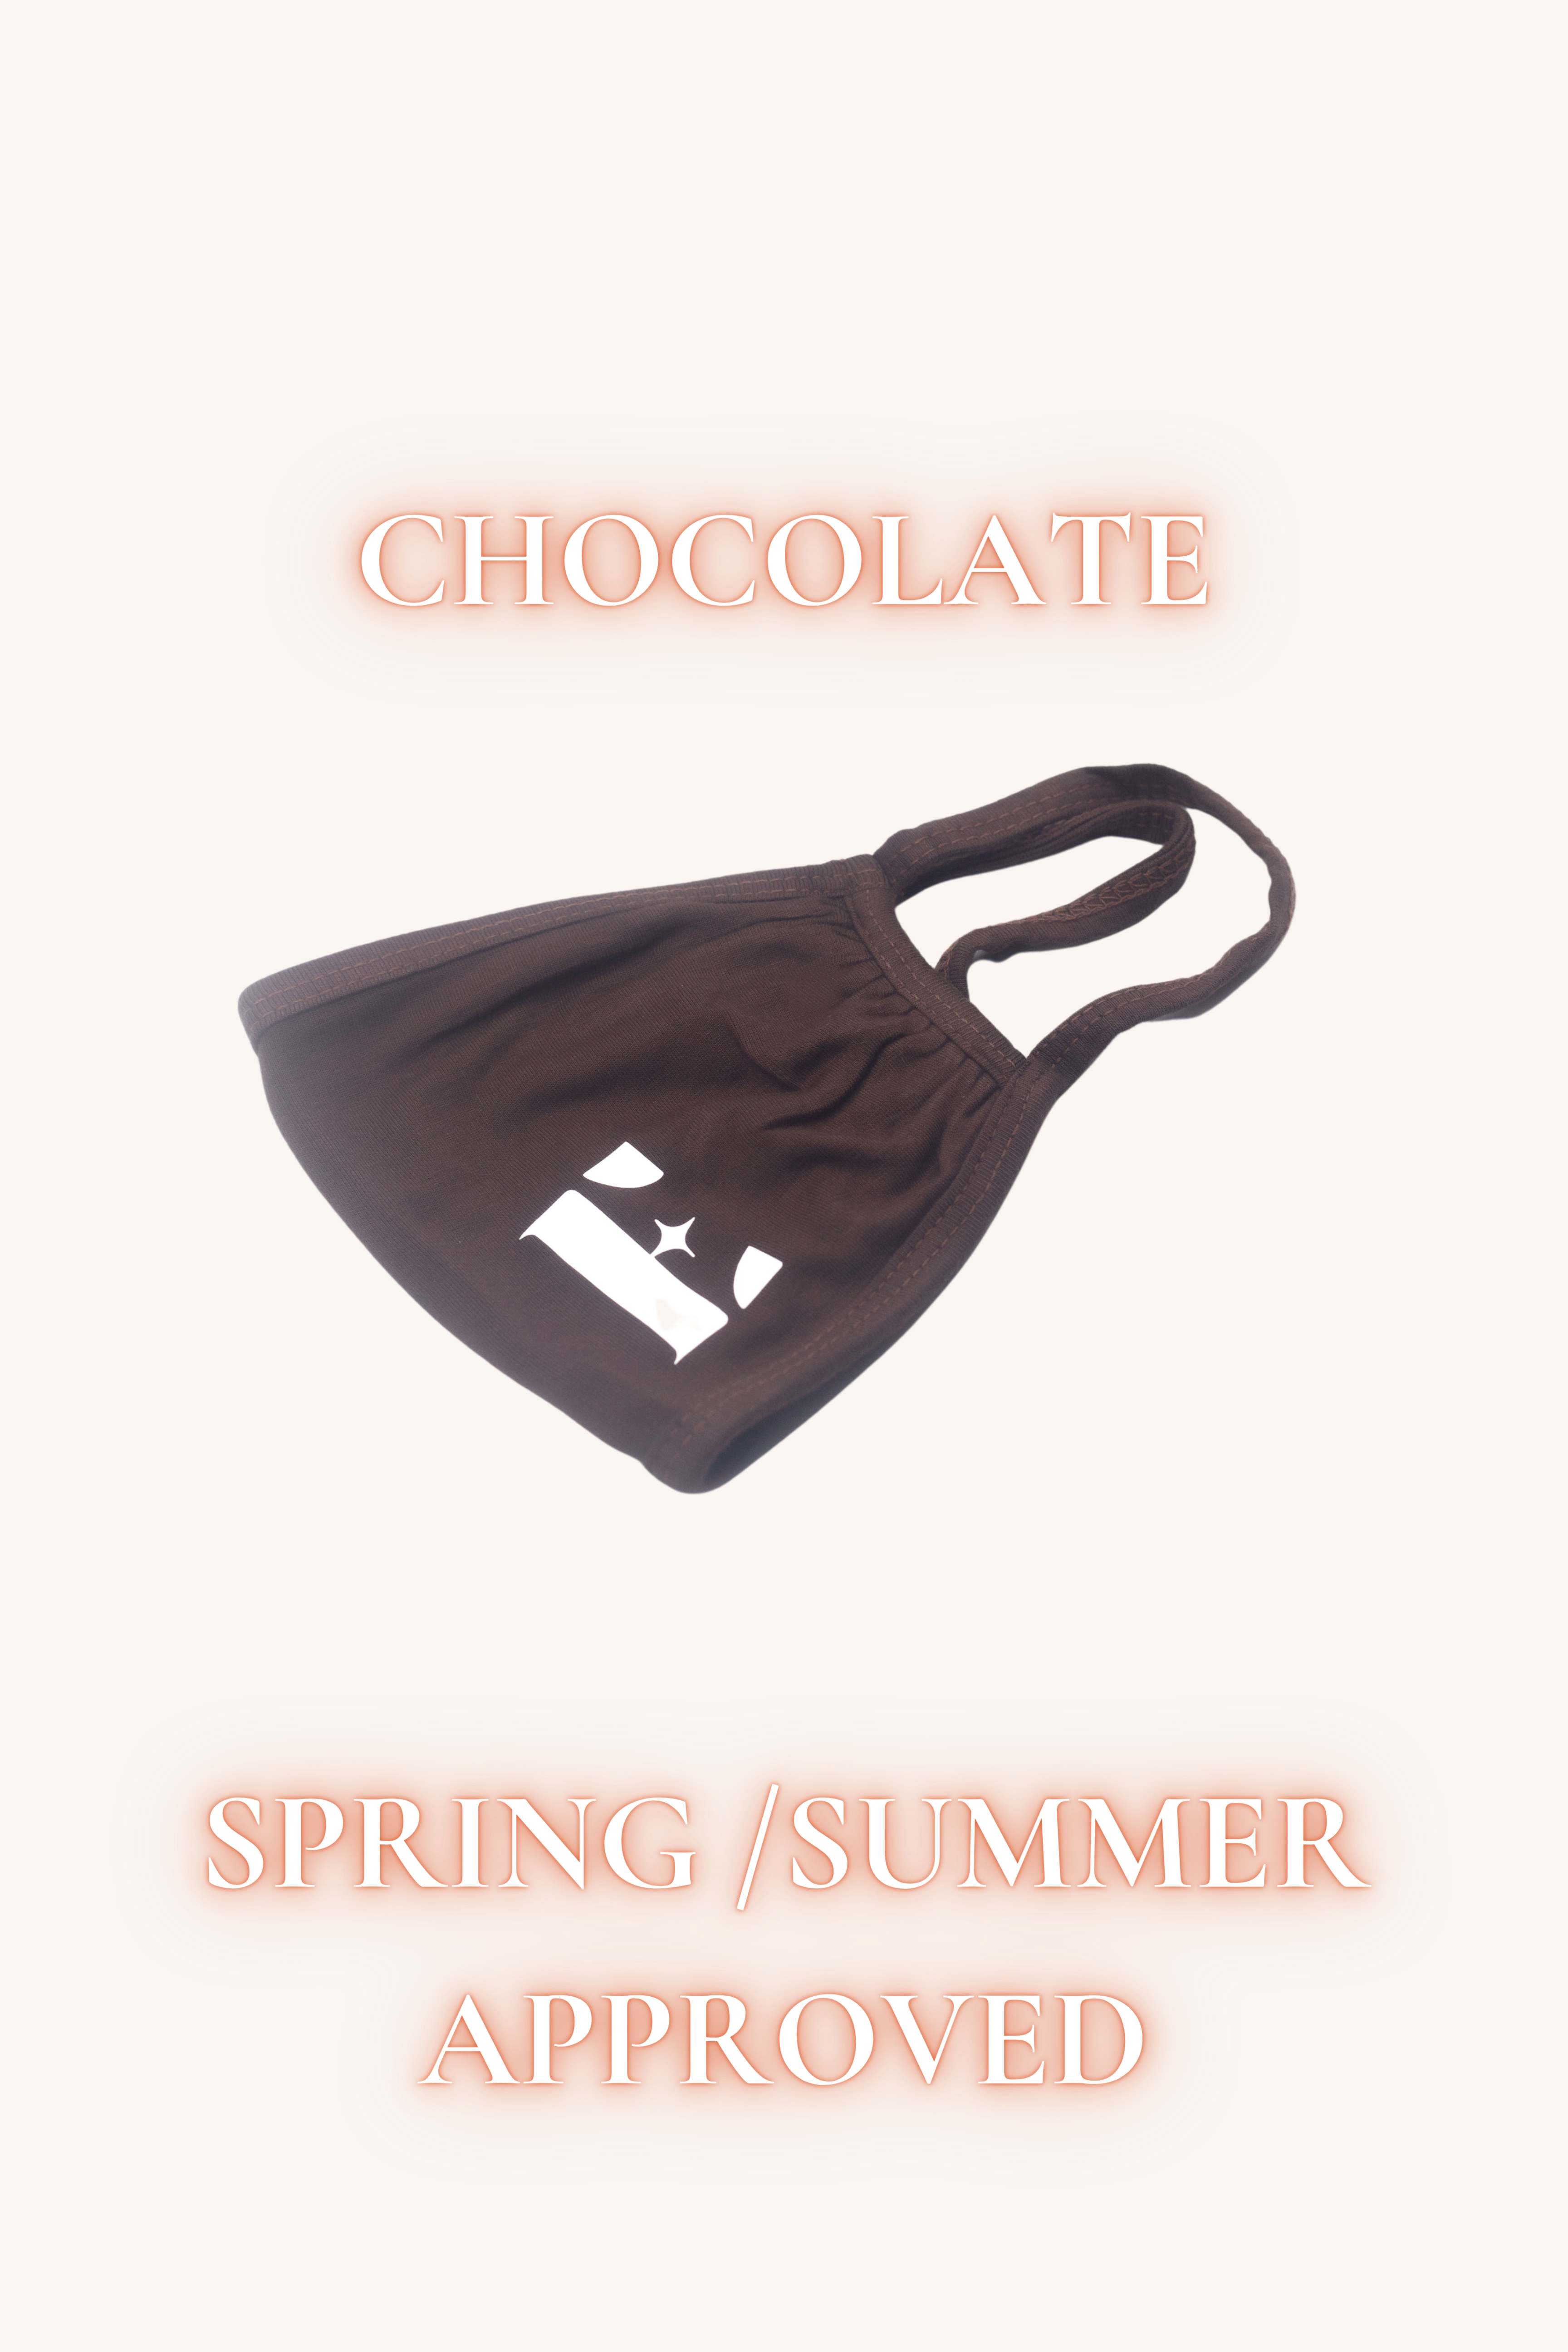 Dark brown face mask with the E's Element logo imprinted in white. Above the mask is the word "CINNAMON". Below the mask are the words, "SPRING/SUMMER APPROVED". Reusable Masks (5 Piece) by E's Element.